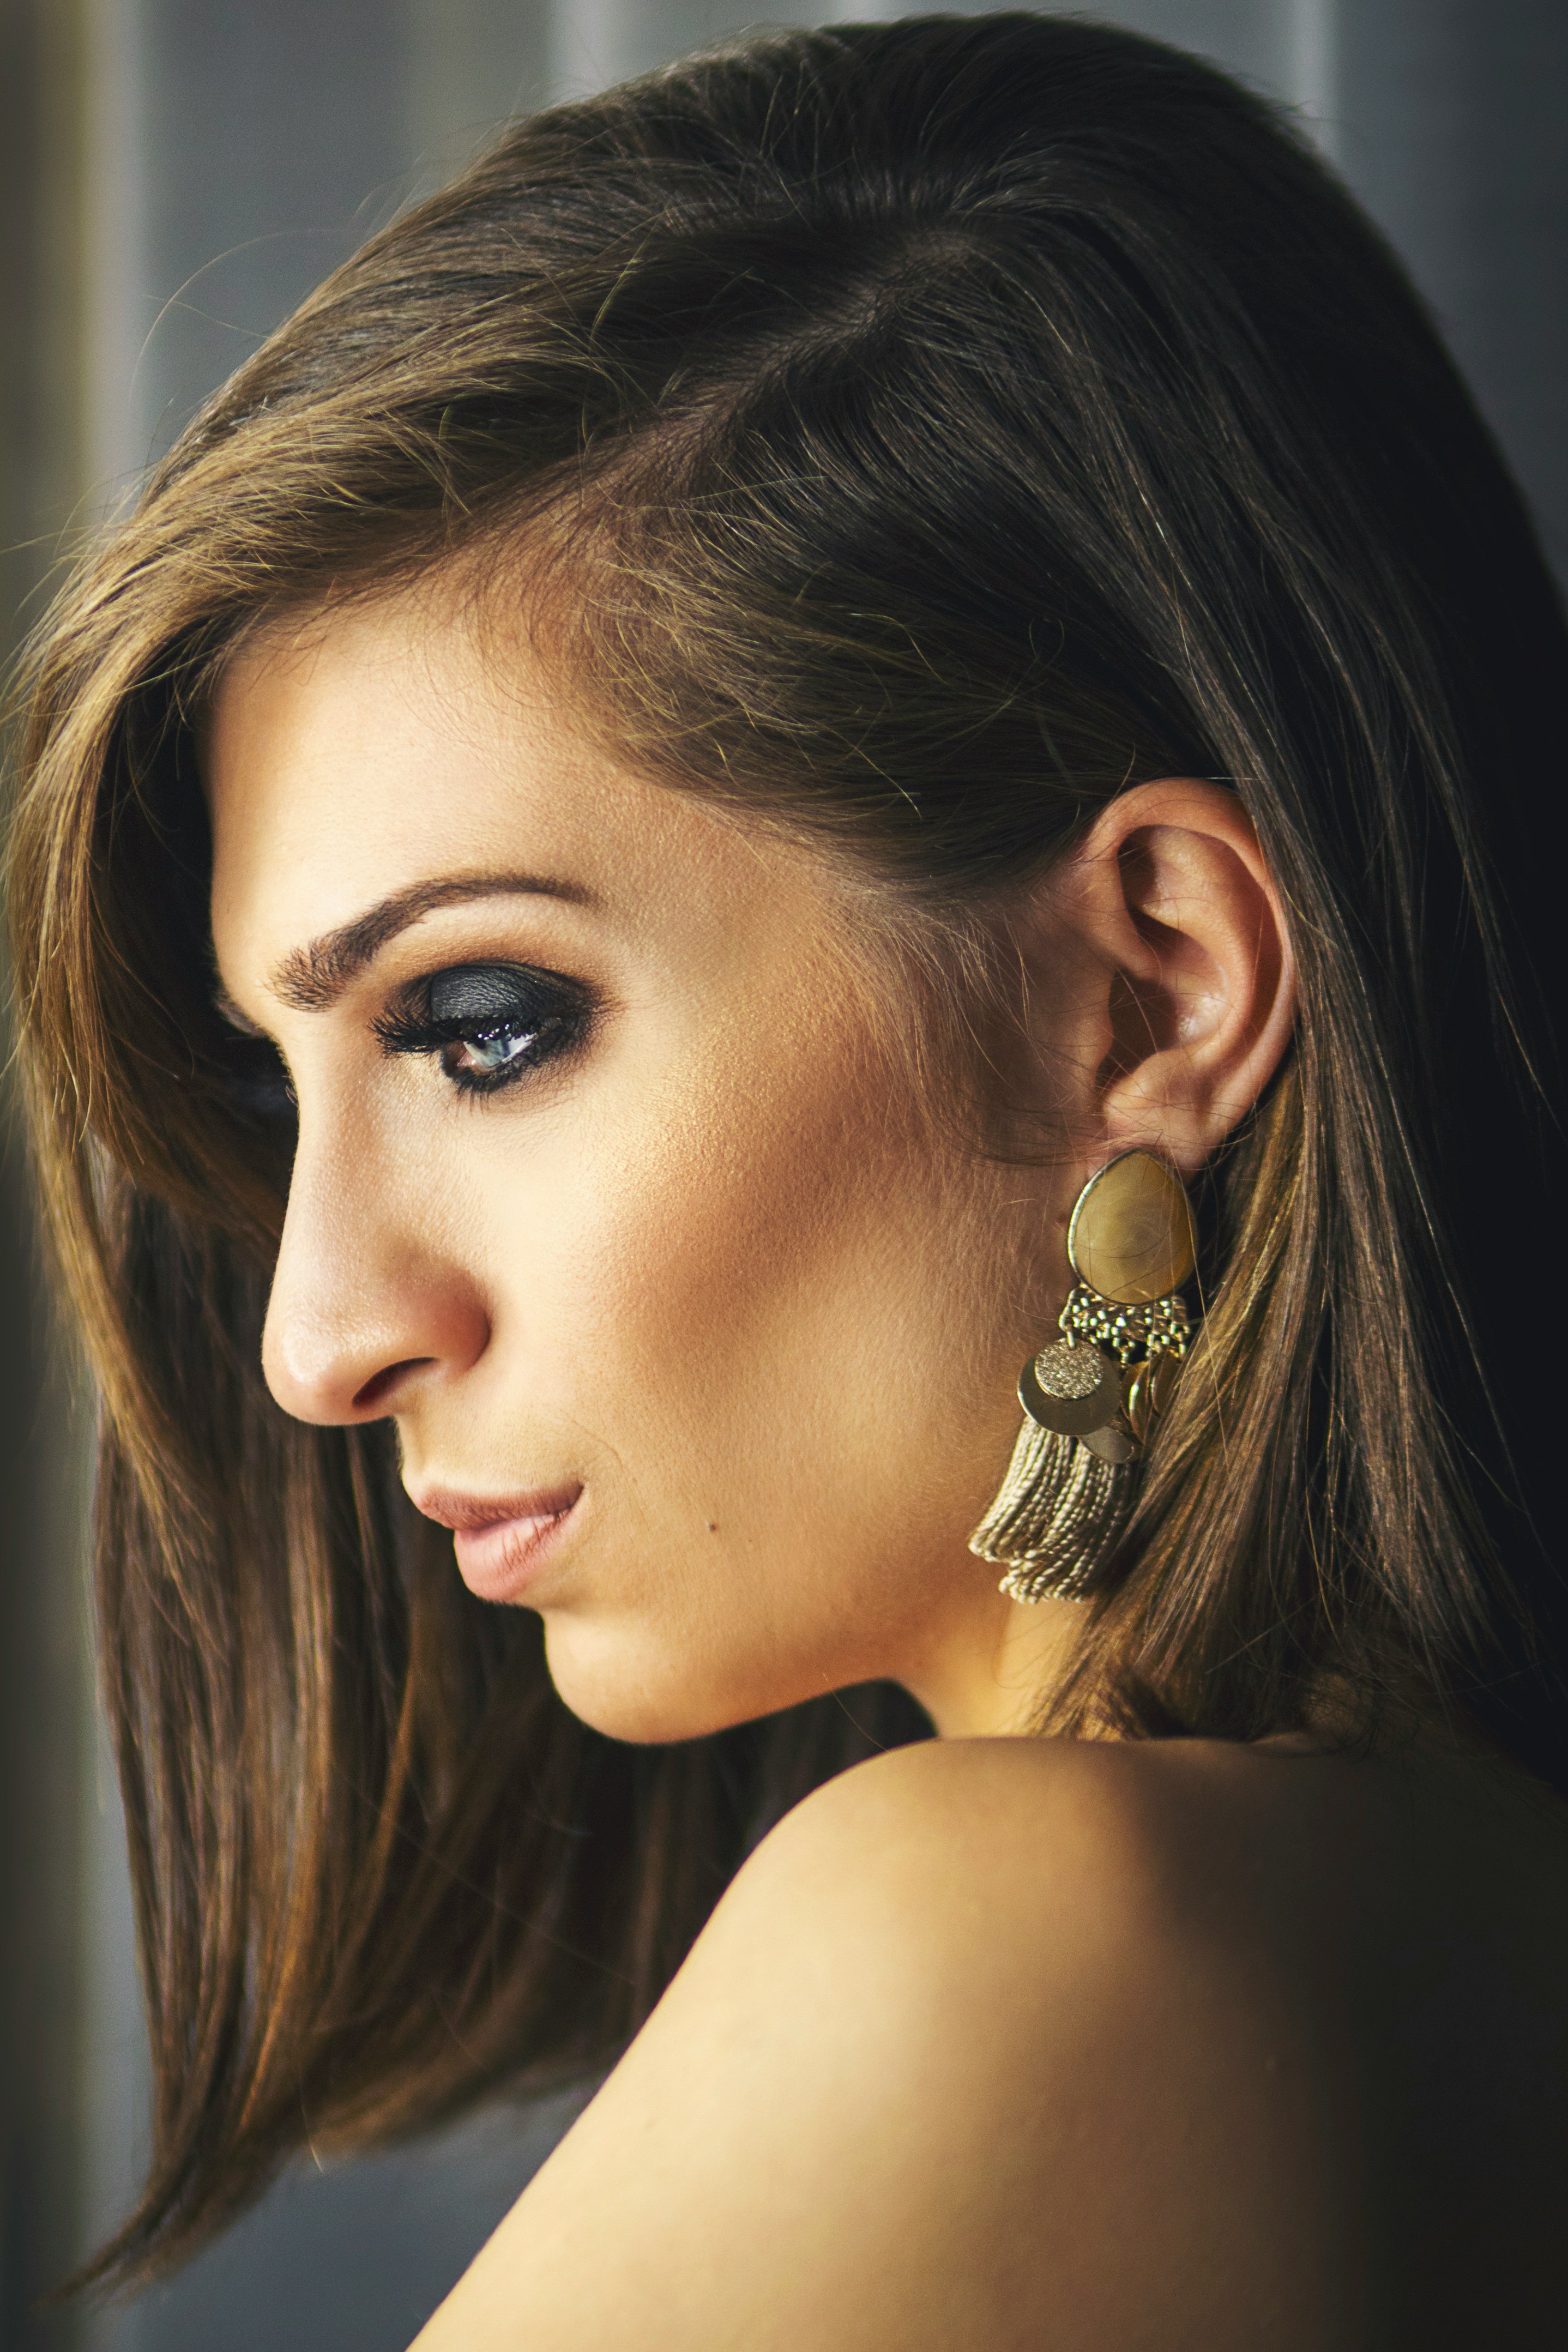 woman with gold and diamond stud earring